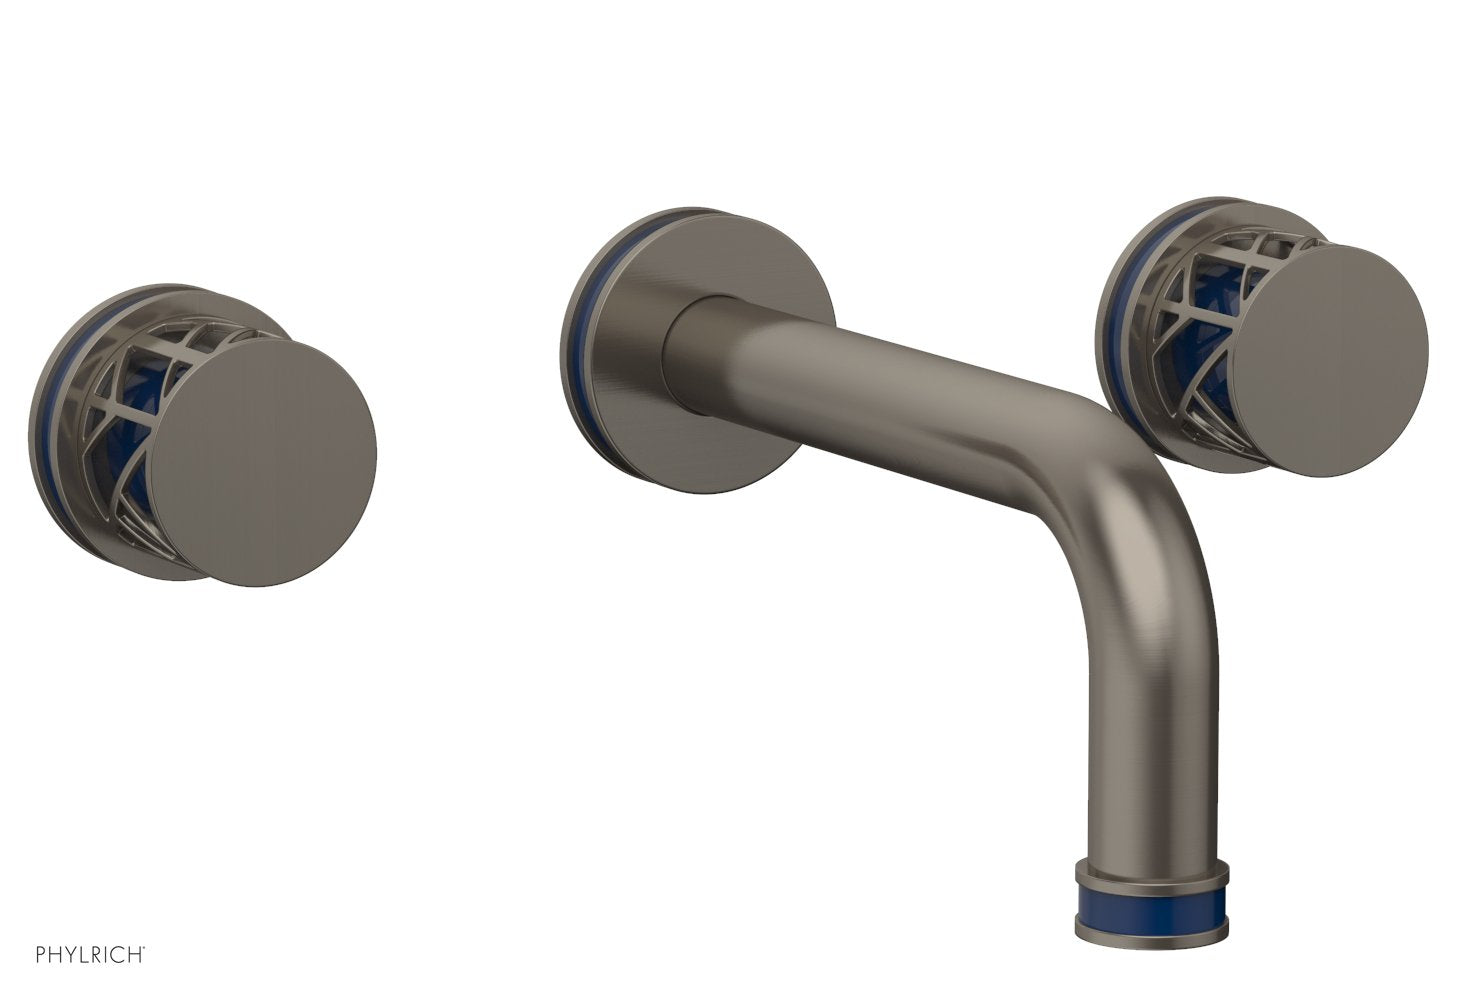 Phylrich JOLIE Wall Lavatory Set - Round Handles with "Navy blue" Accents